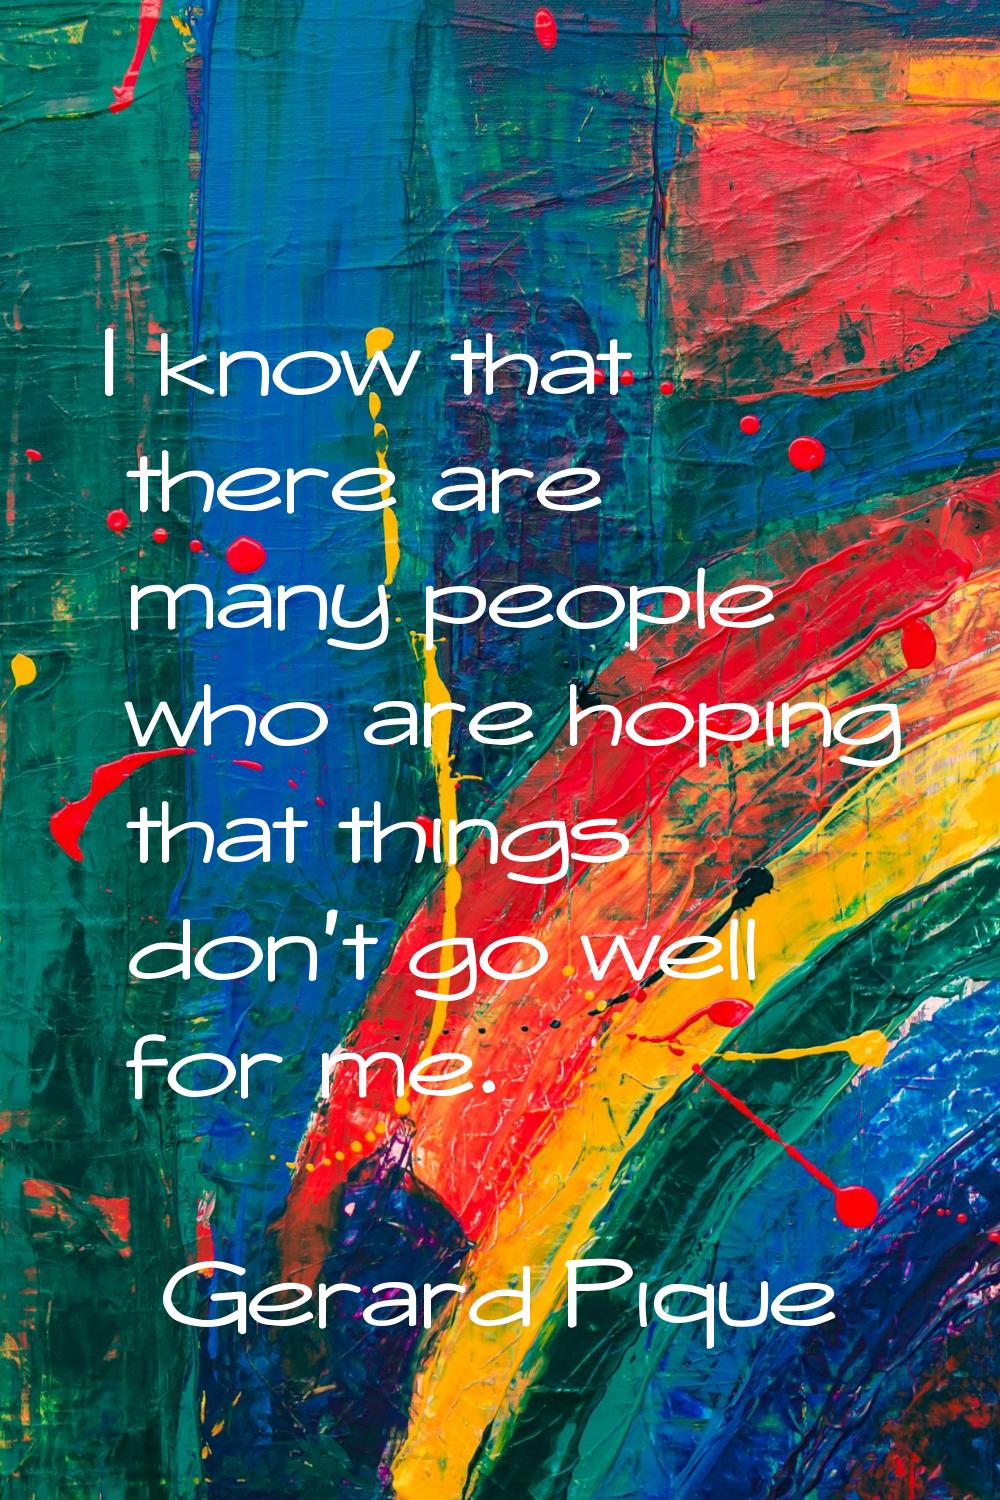 I know that there are many people who are hoping that things don't go well for me.